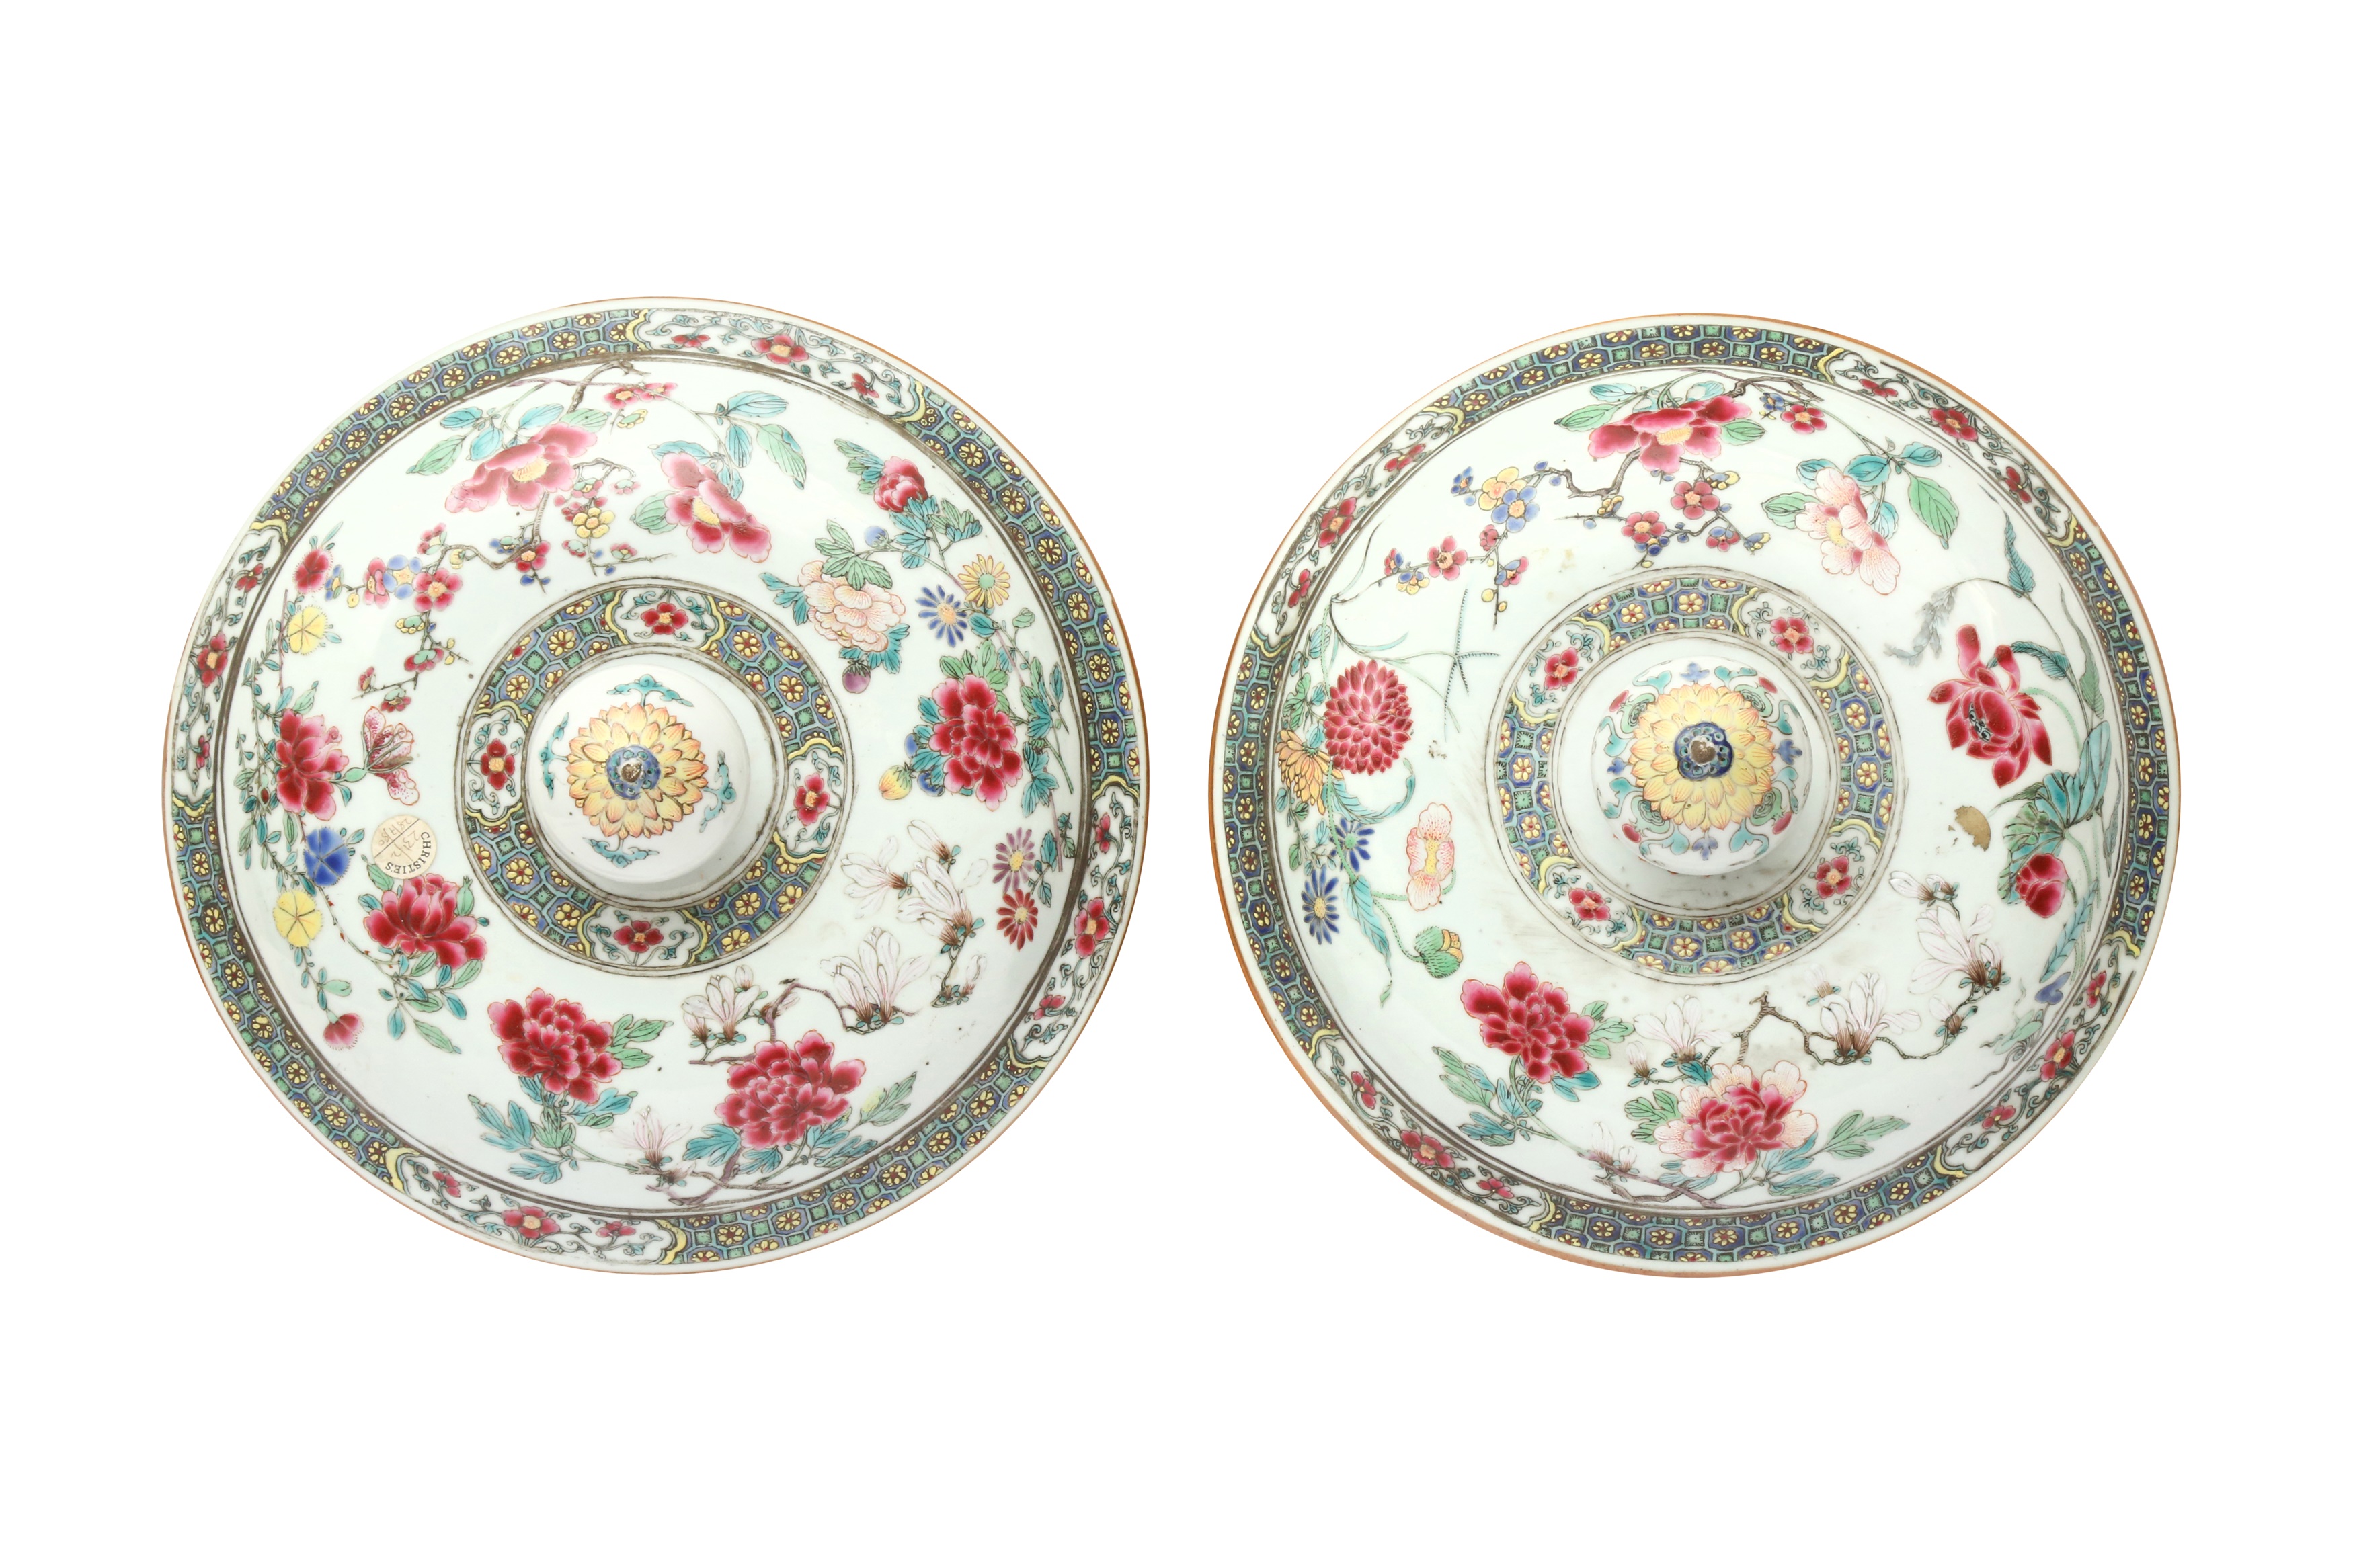 A PAIR OF LARGE CHINESE EXPORT FAMILLE-ROSE COVERS 清十八至十九世紀 外銷粉彩花卉蓋一對 - Image 2 of 2